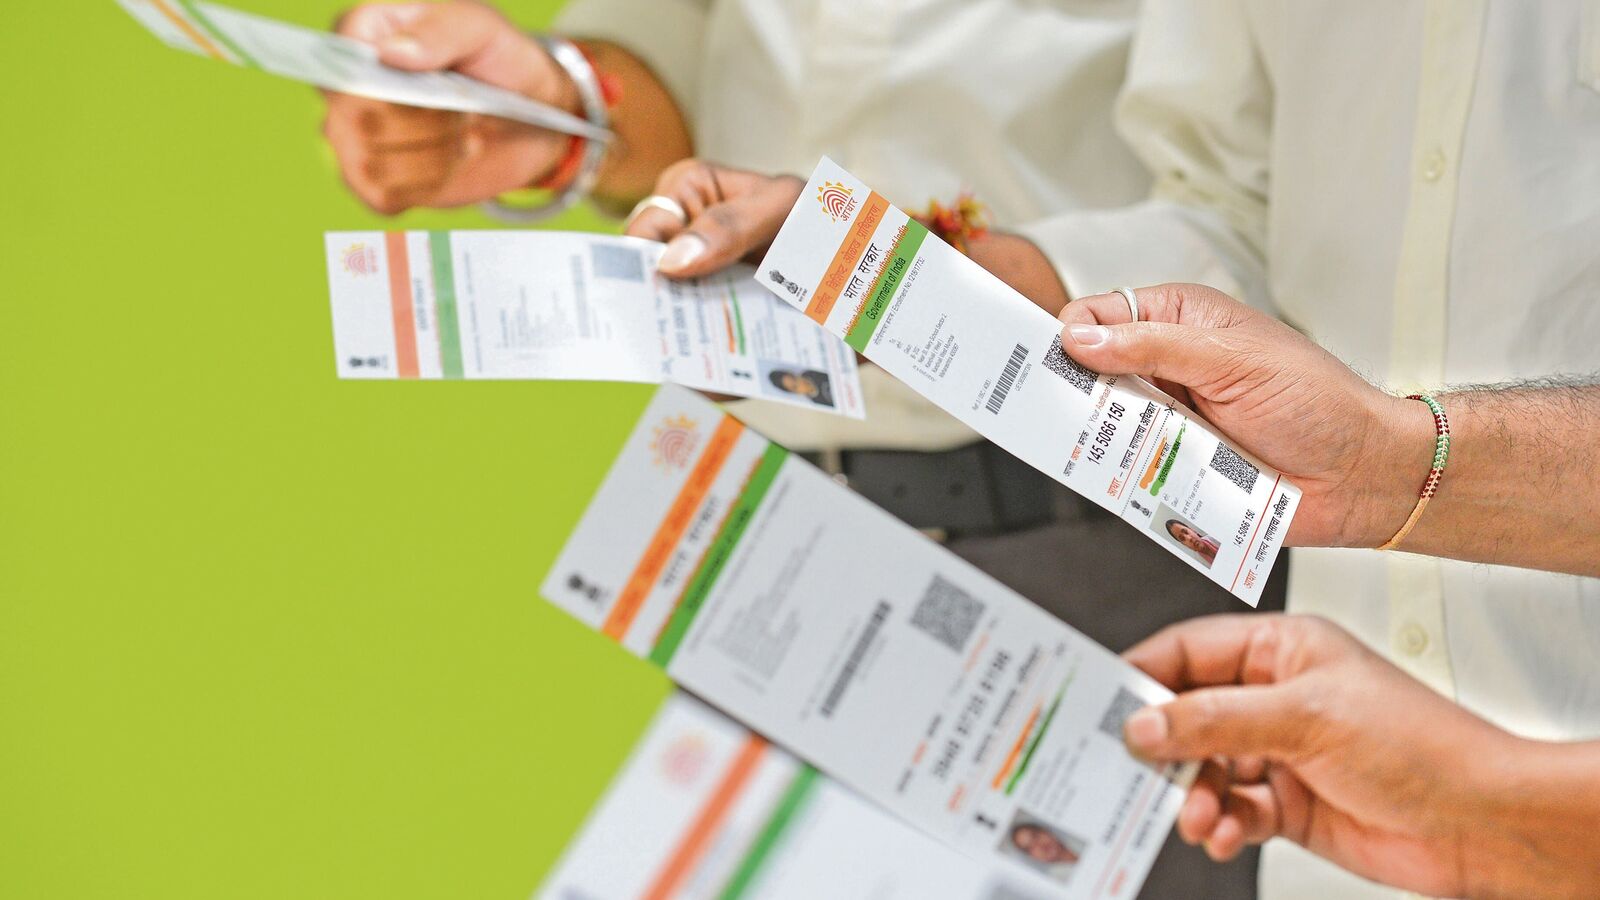 Free Aadhaar update: UIDAI extends deadline; check step-by-step process and other details here